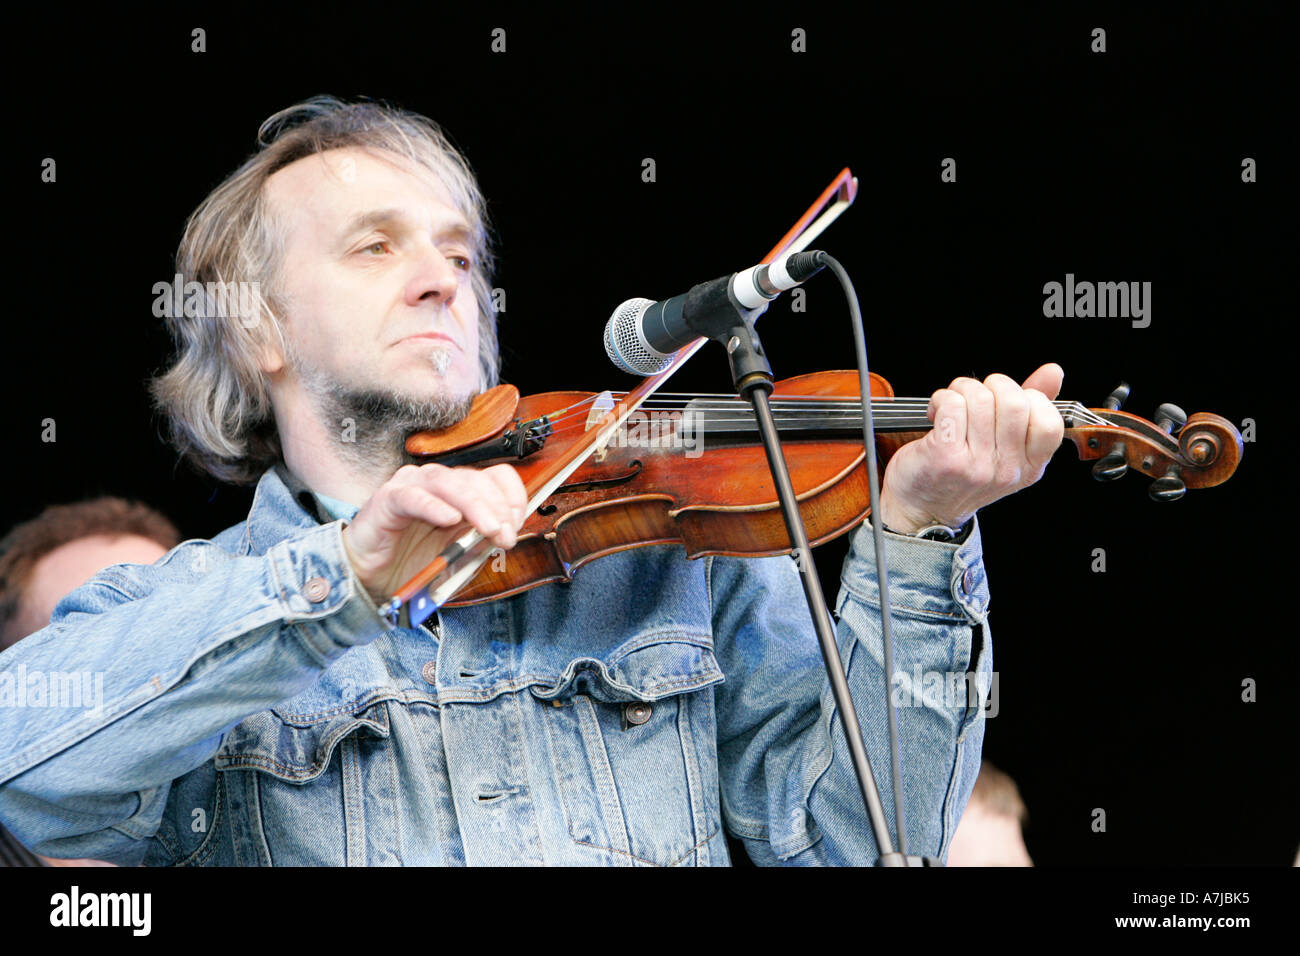 Willie Drennan Musician on stage with violin fiddle and microphone wearing denim jacket during concert for St Patricks Day Stock Photo